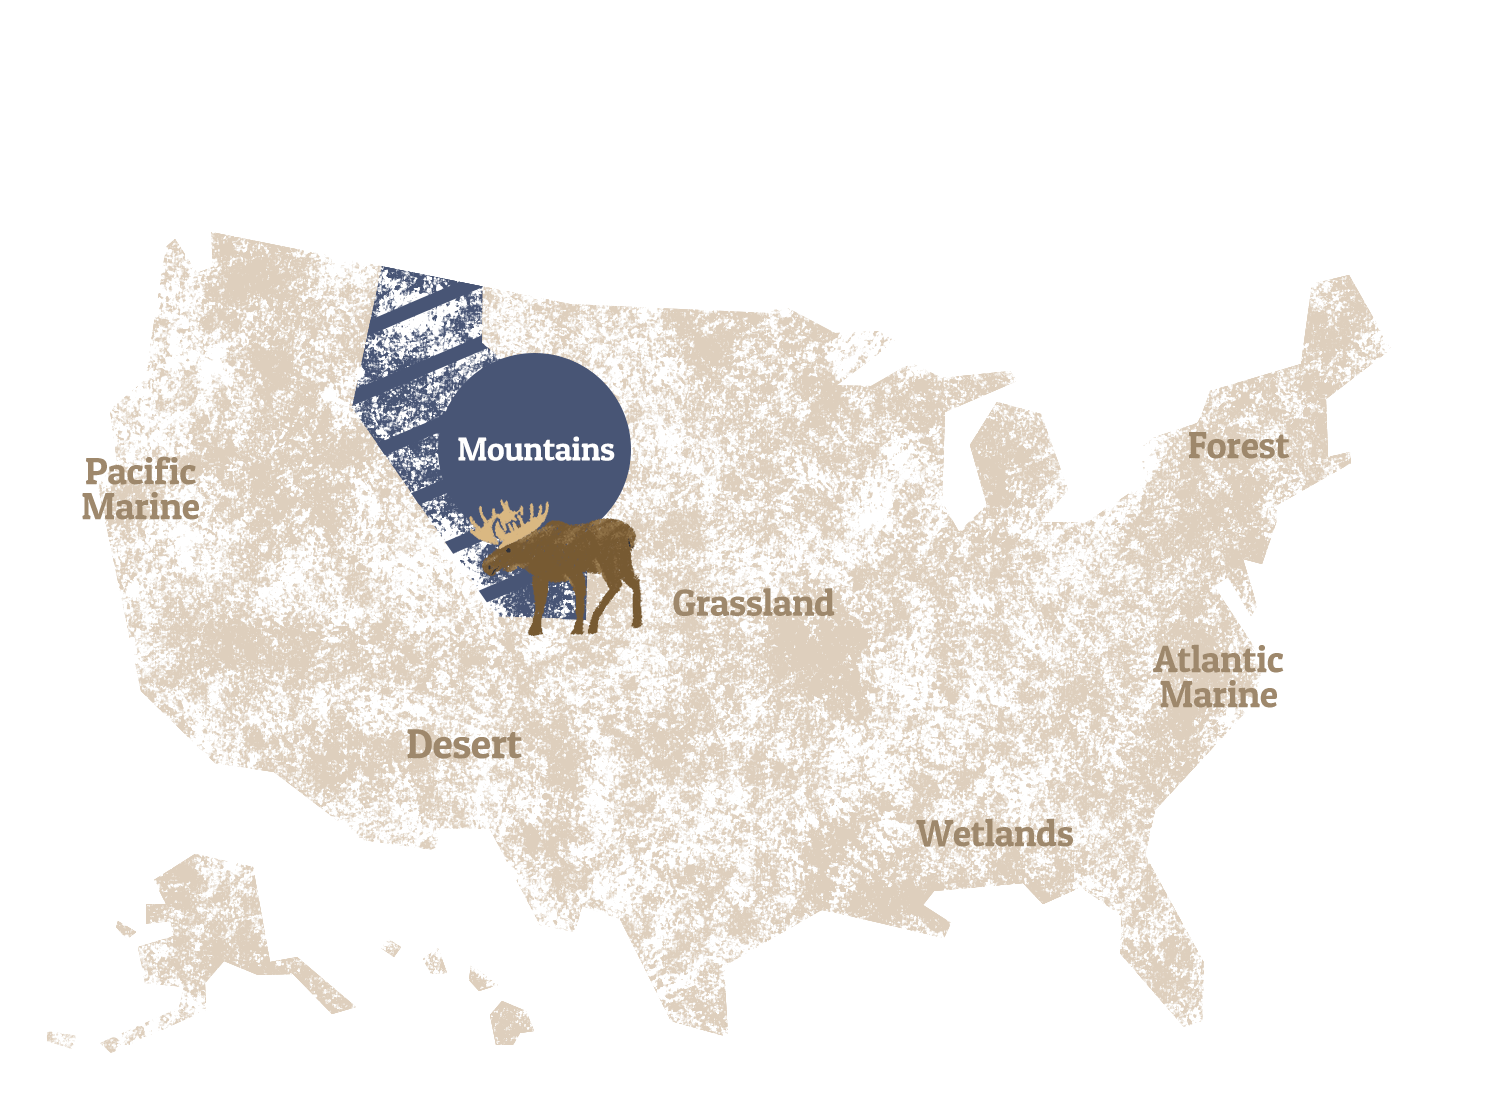 A graphic map of the United States, highlighting the Mountains.